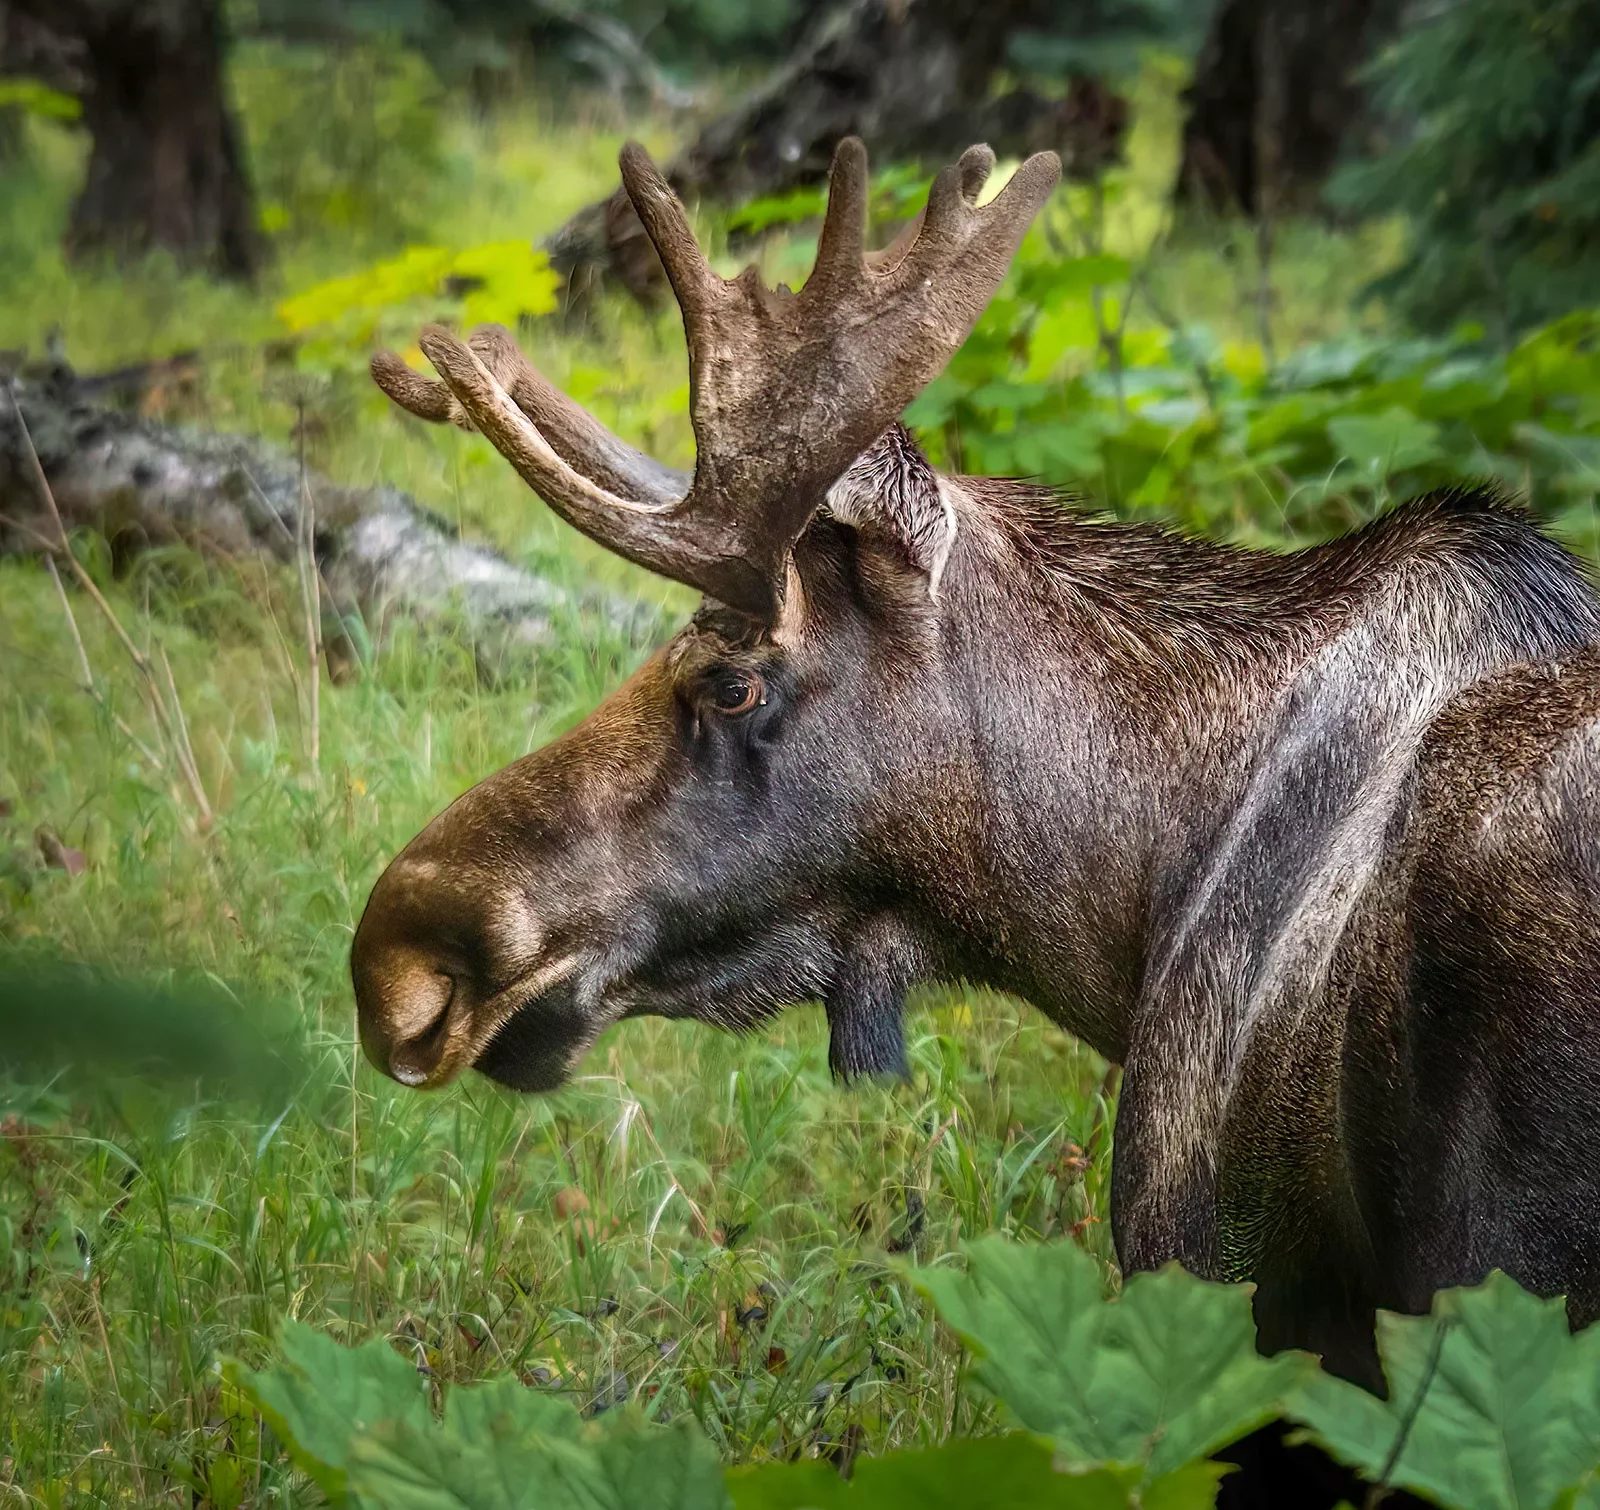 Closeup of wild moose and forest landscape.